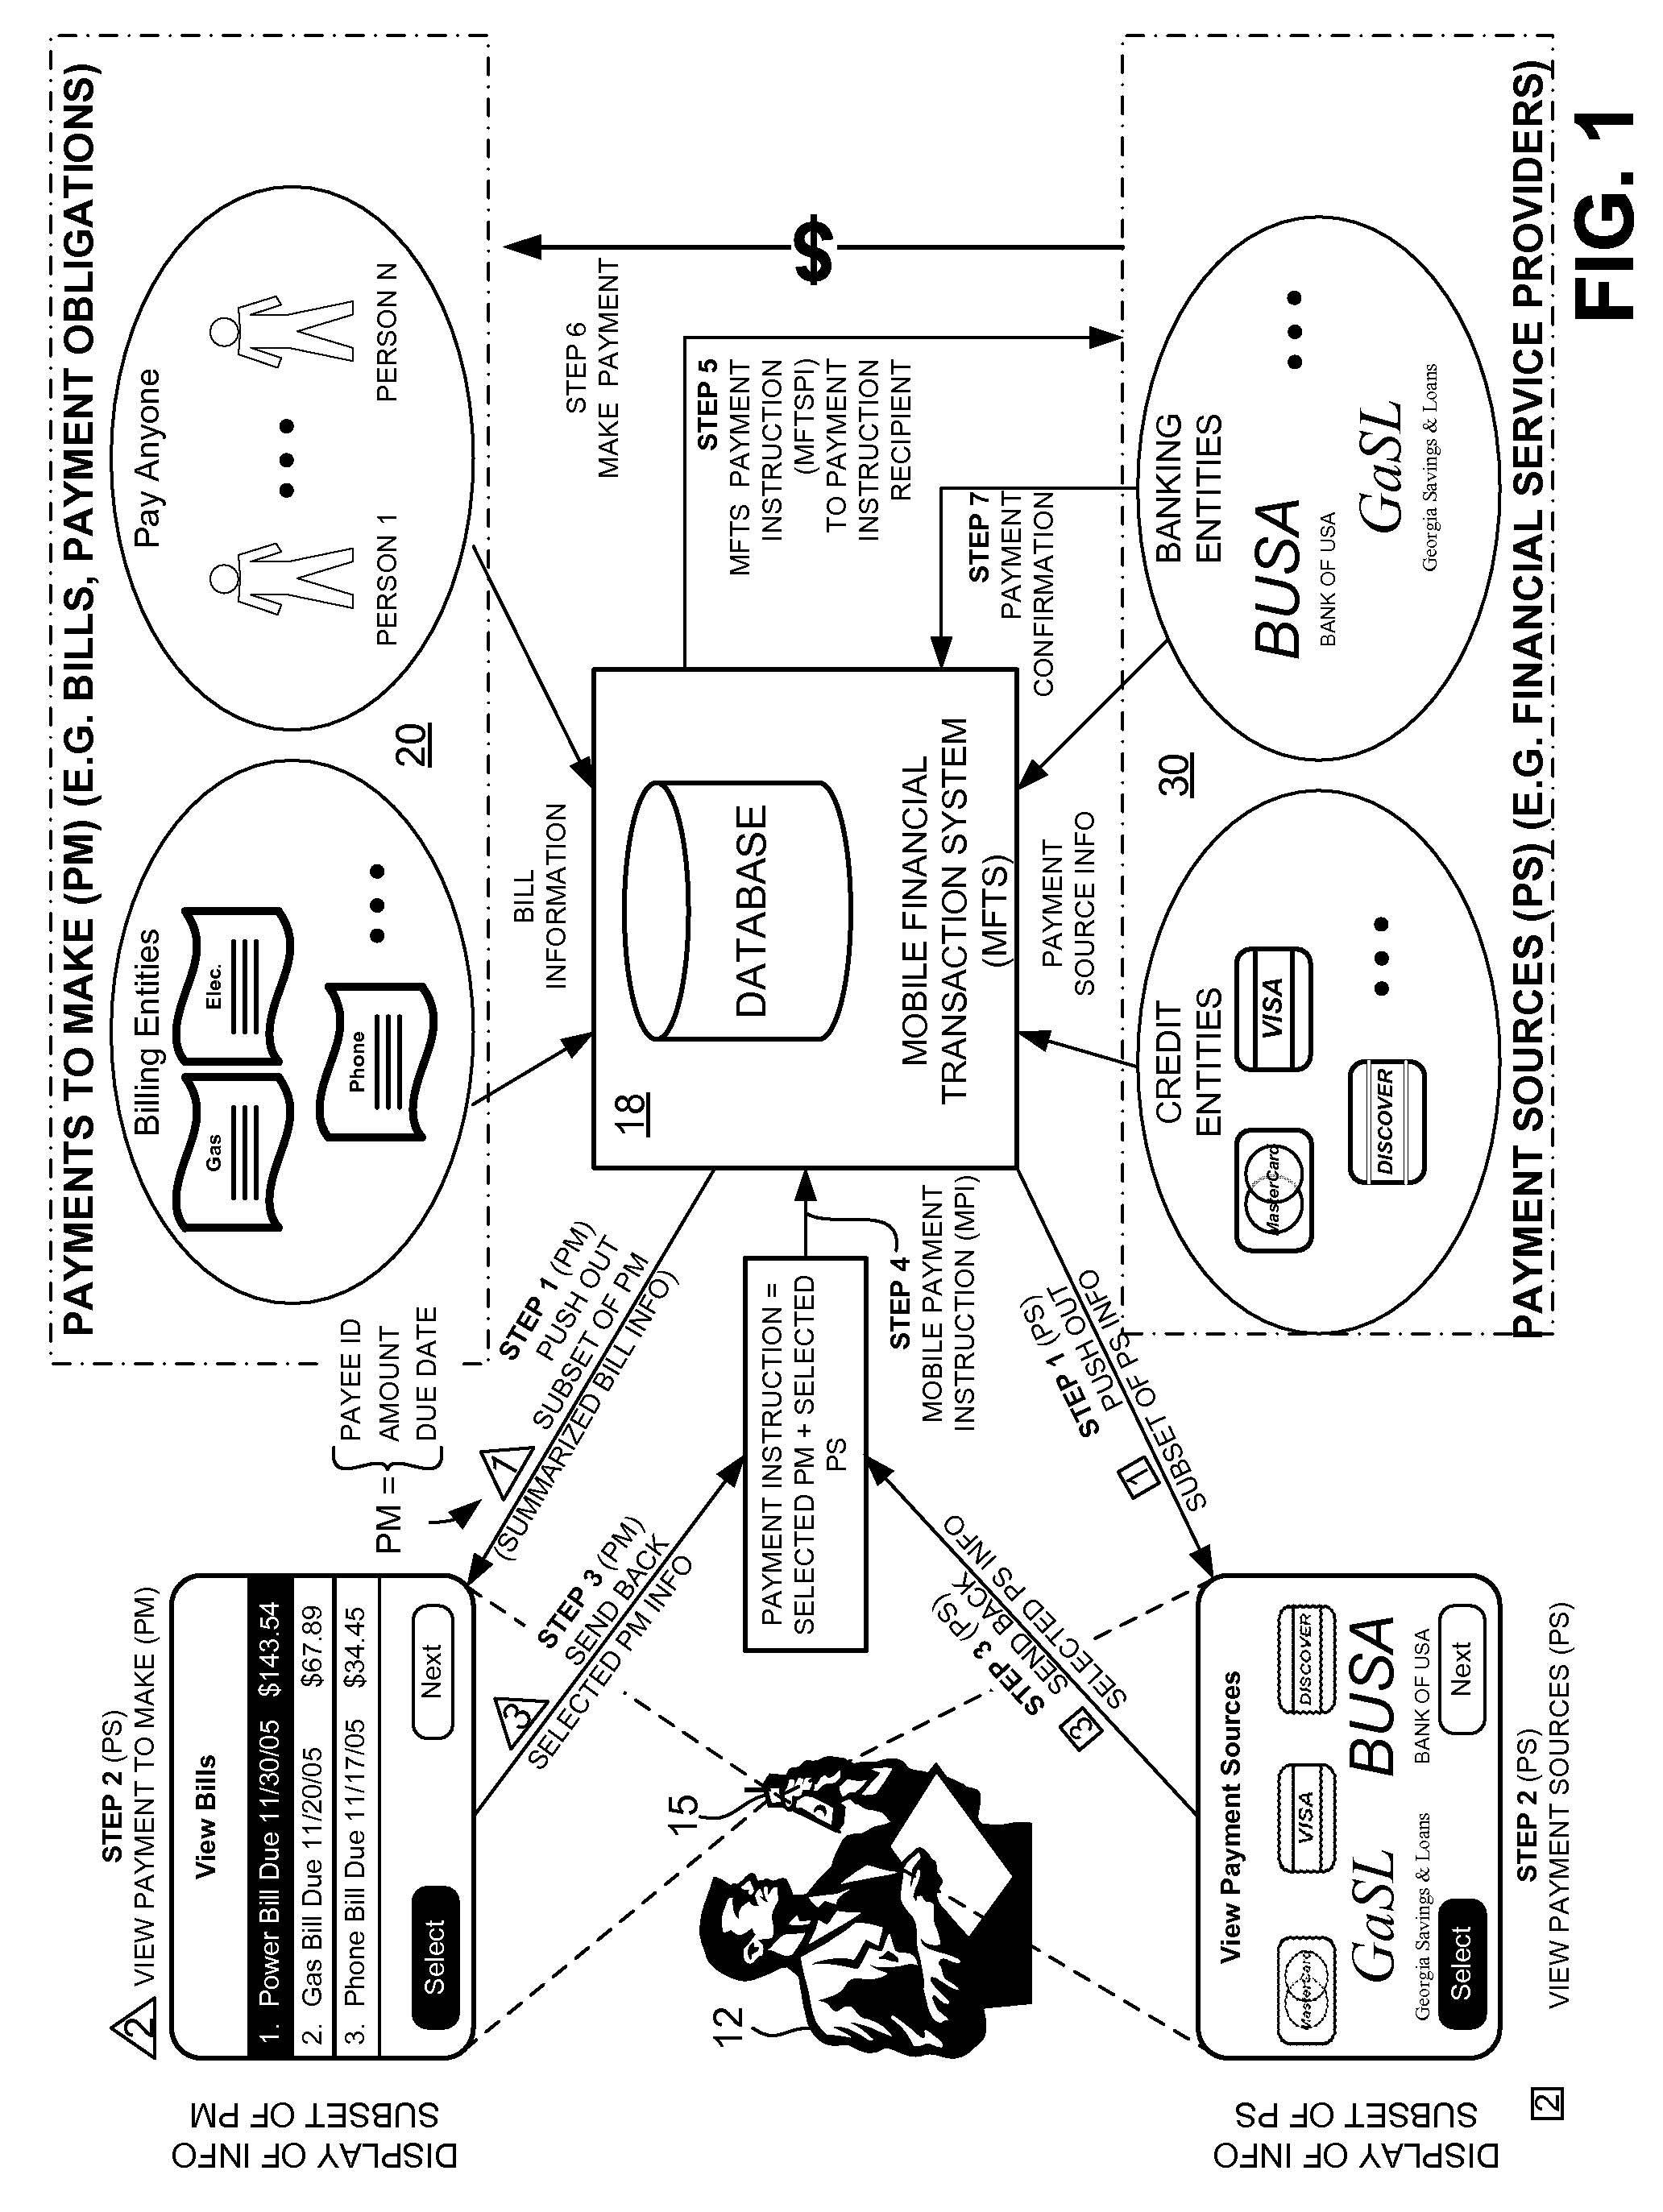 Methods and Systems For Making a Payment Via a Paper Check in a Mobile Environment